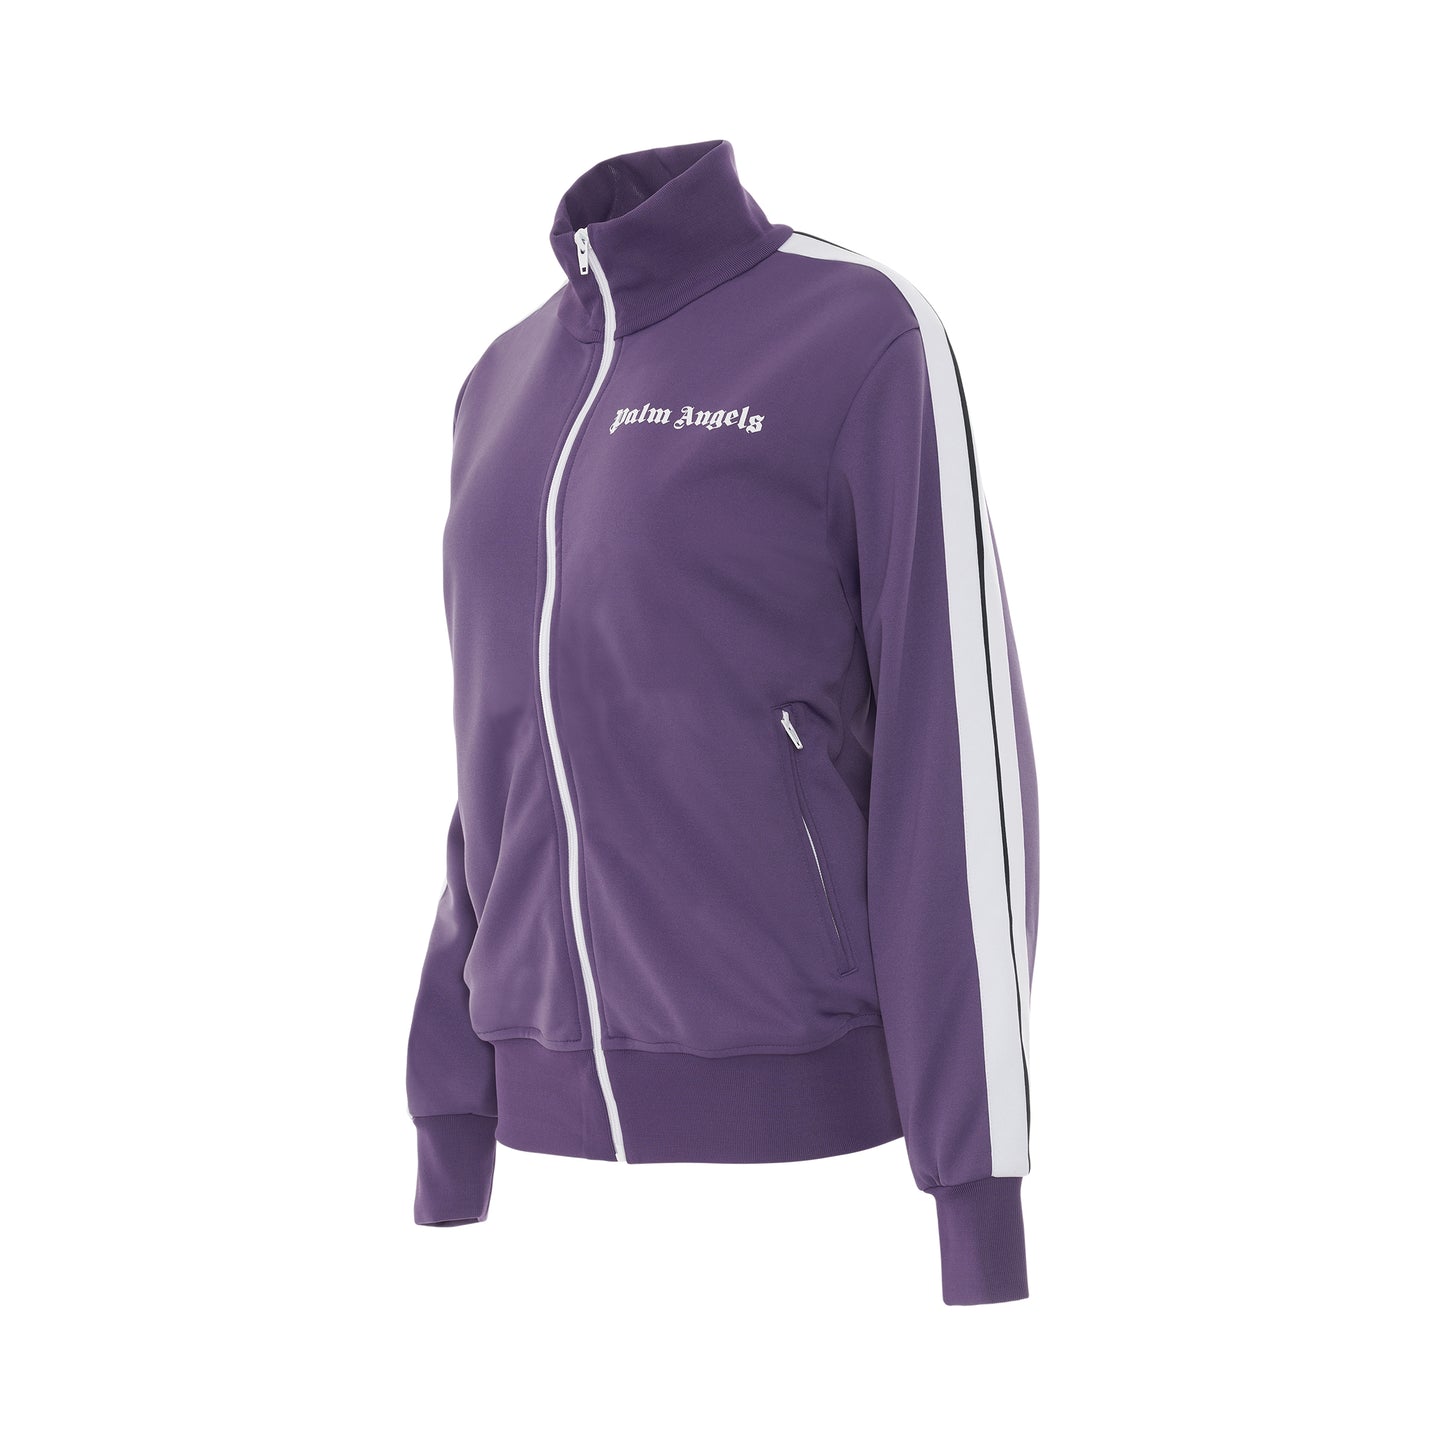 Classic Track Jacket in Purple/Butter